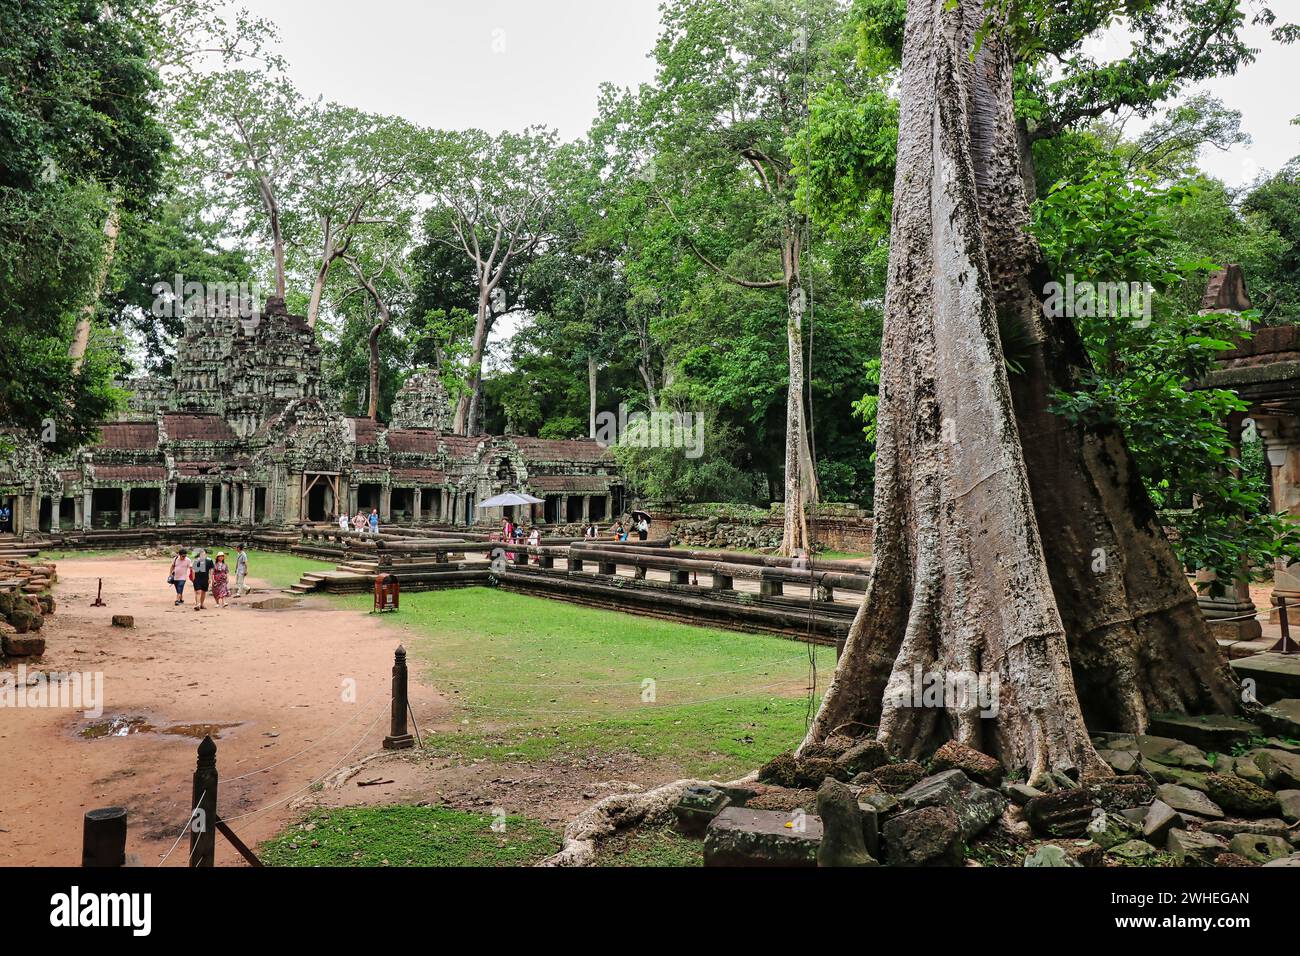 View of Ta Phrom temple outer grounds, famous as the Tree root temple in Tomb raider movie starring Angelina Jolie near Angkor wat, Siem Reap,Cambodia Stock Photo